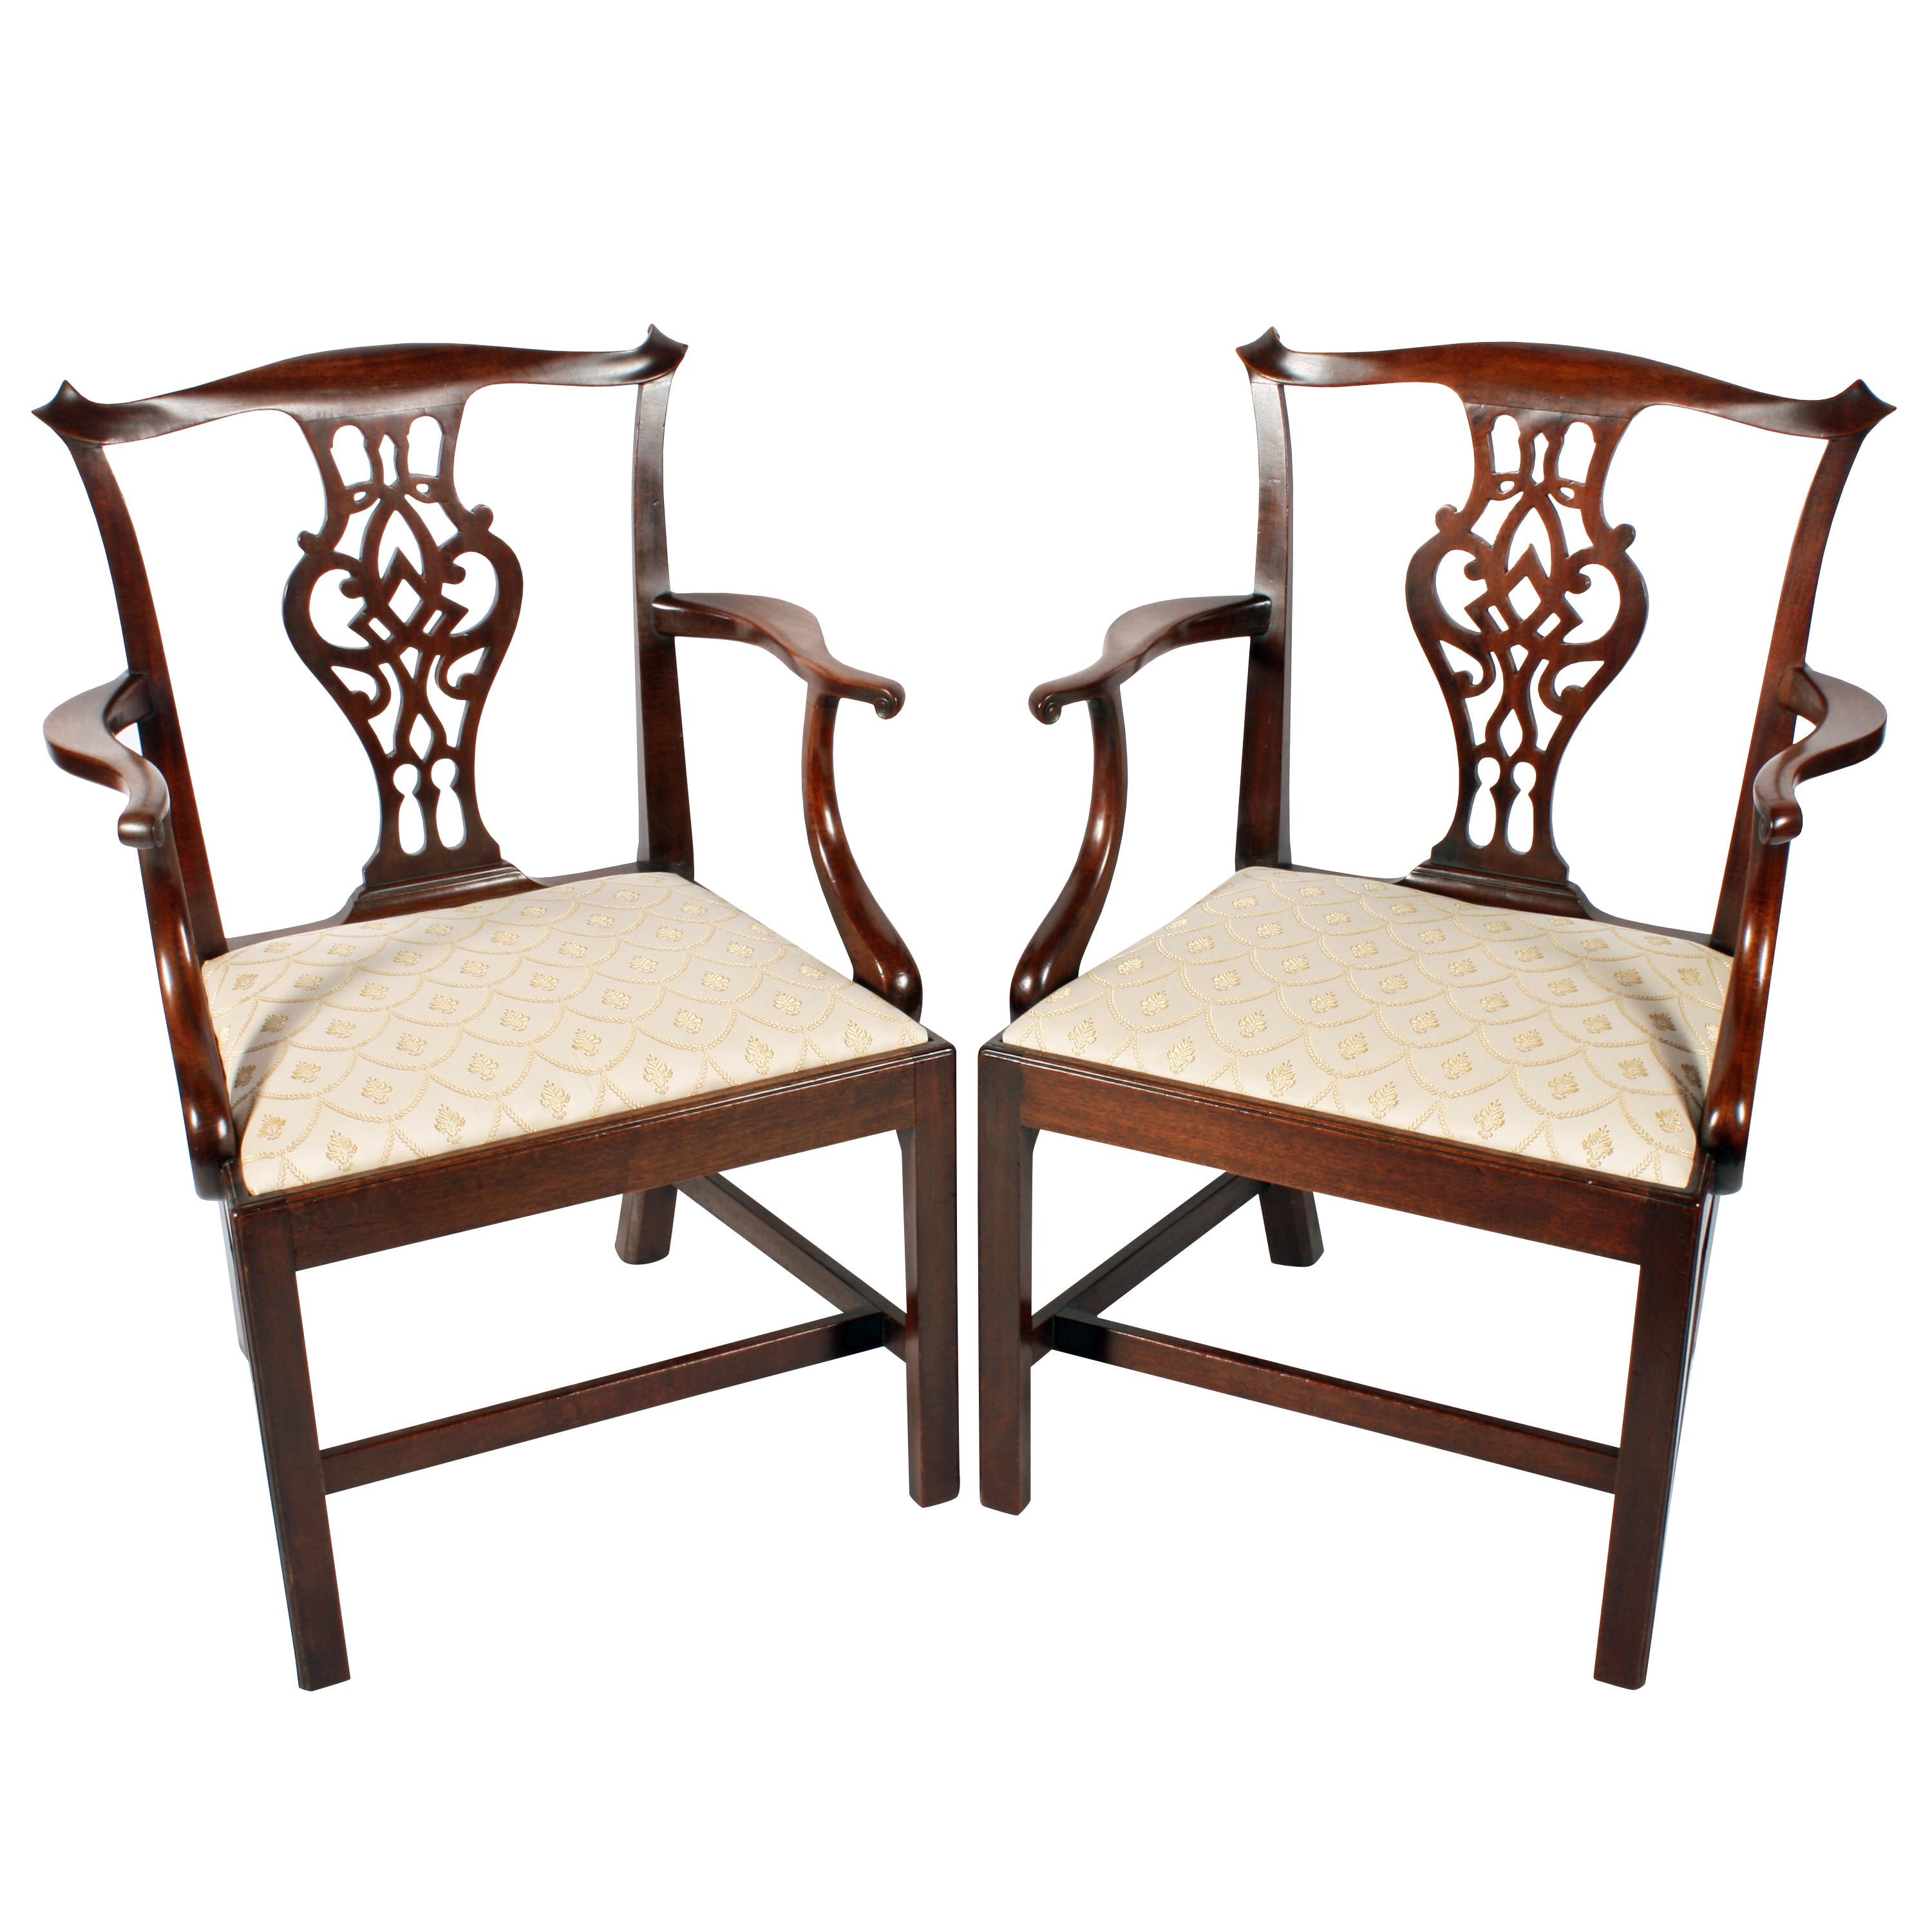 A pair of Georgian mahogany elbow chairs of larger proportions.

The chairs have a serpentine top rail with concave scroll ends and drop in pad seats.

The broad centre splat is fret work carved, the shaped arm rests have a carved support and a